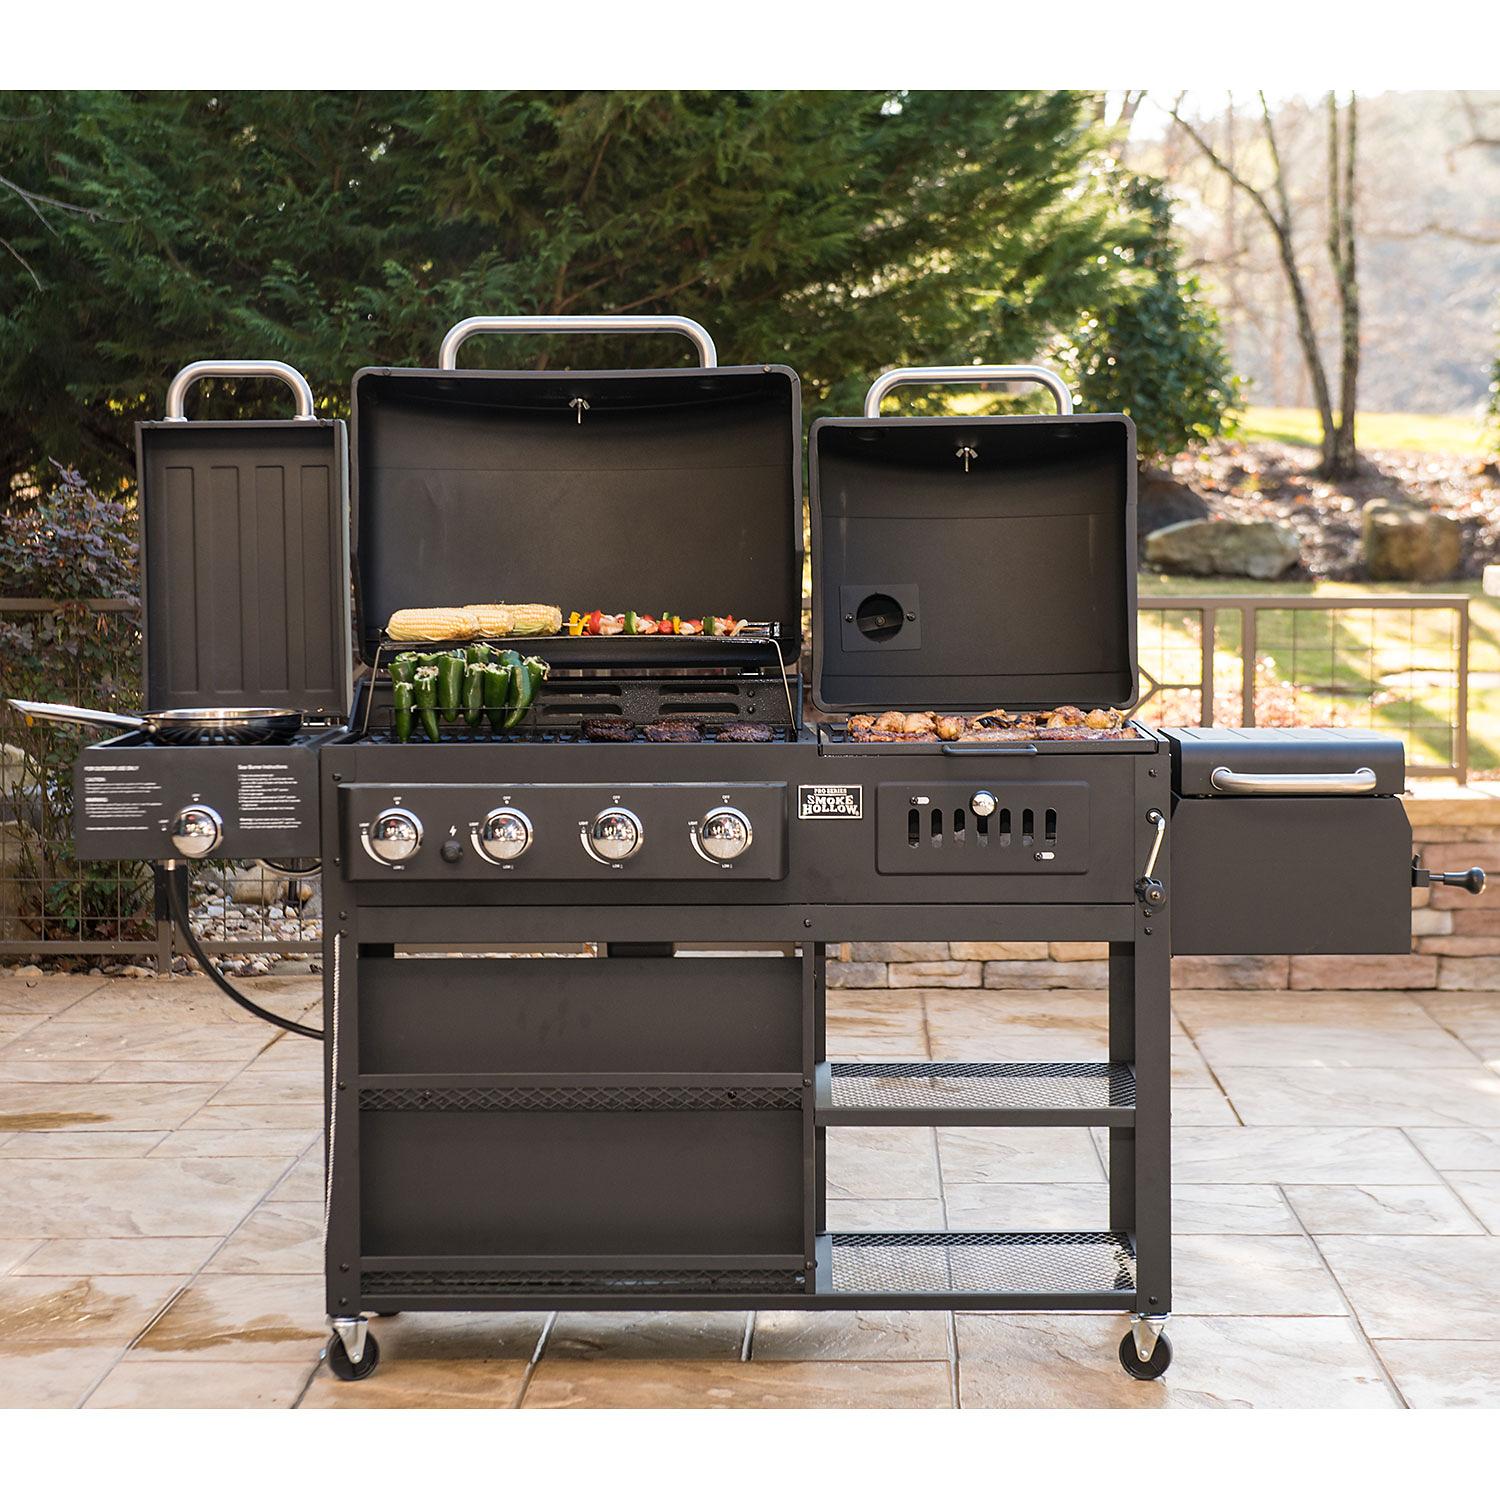 Bbq Grills And Smokers The Yoder Smokers 24"x48" Charcoal Grill Get